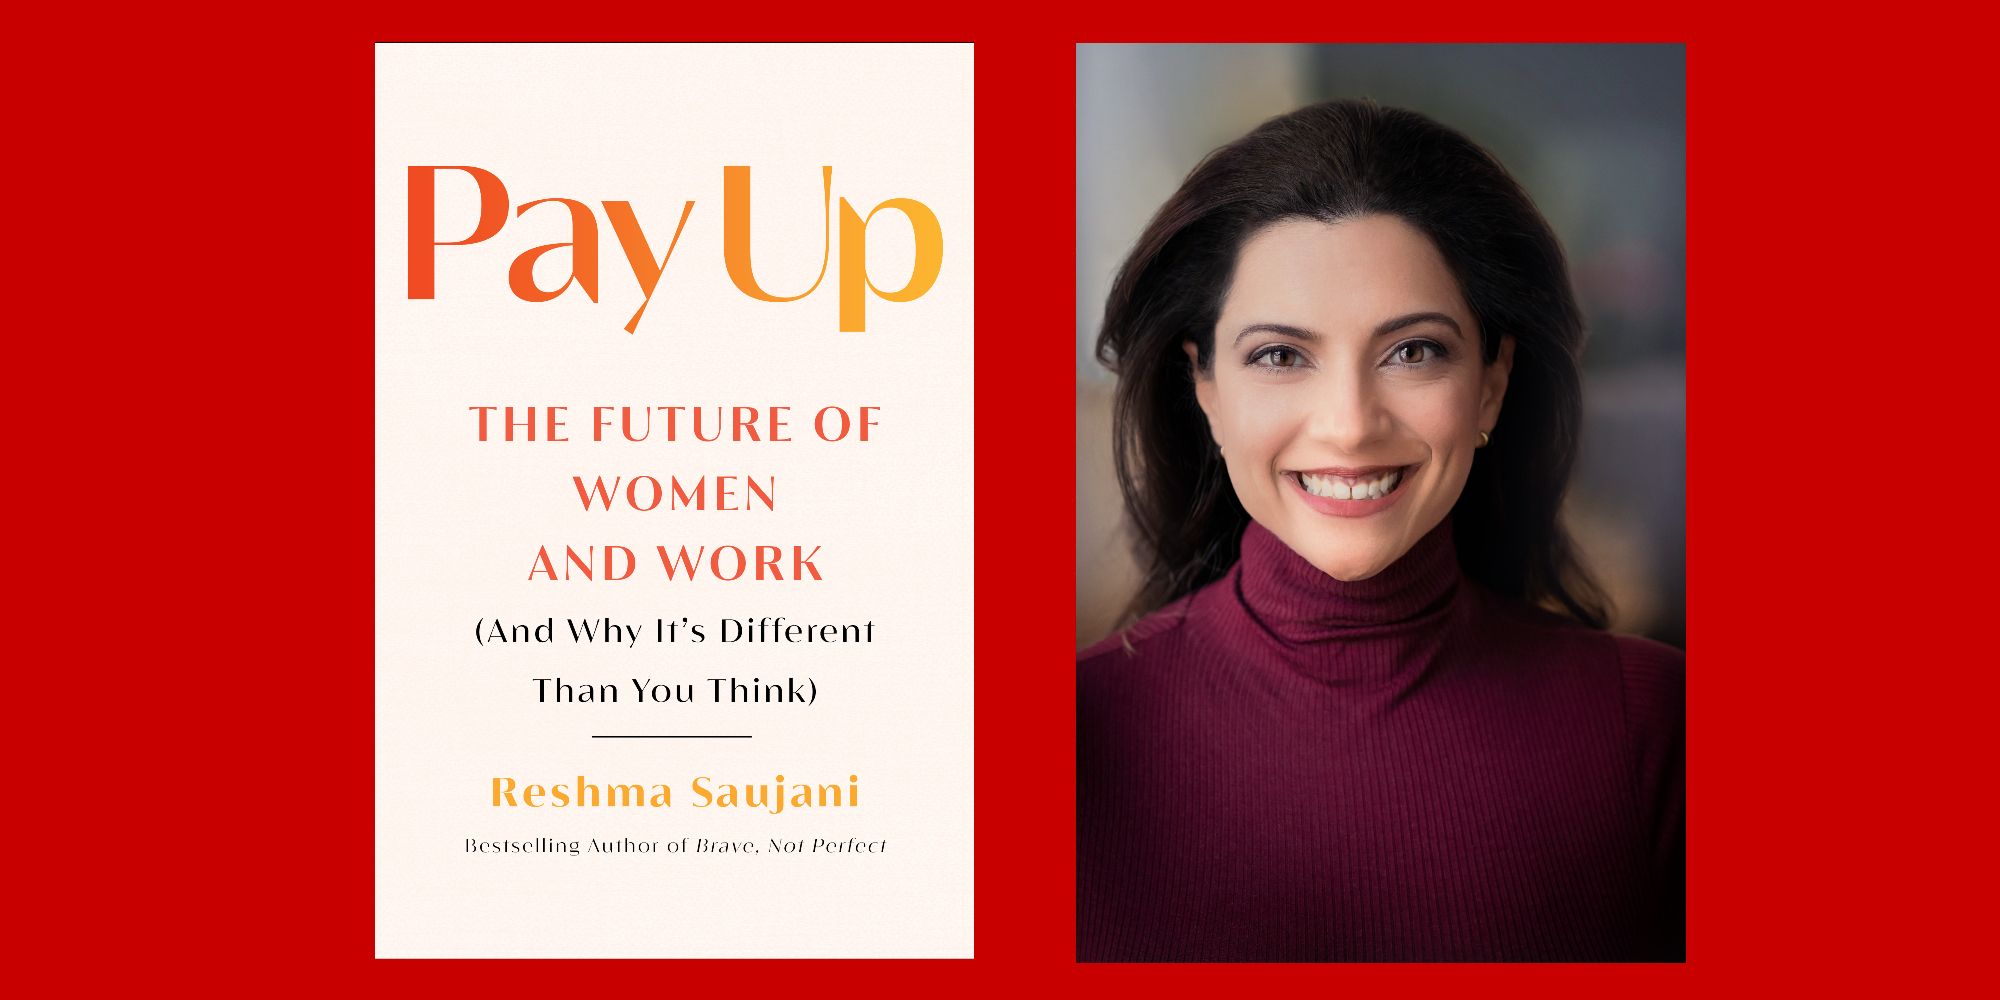 Pay Up: The Future of Women and Work (And Why It's Different Than You Think)